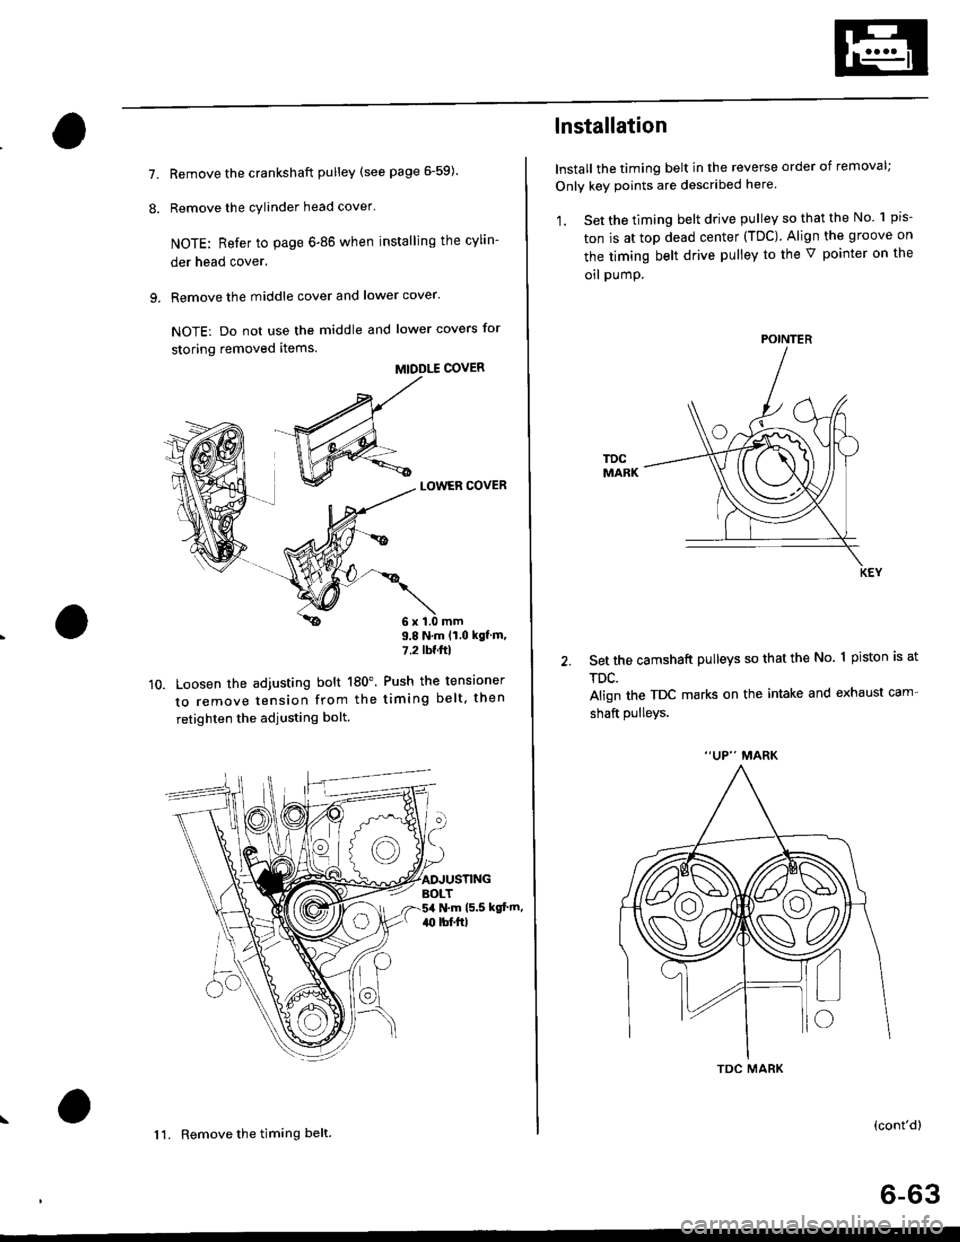 HONDA CIVIC 1996 6.G Workshop Manual 7.
8.
Remove the crankshaft pulley (see page 6-59).
Remove the cylinder head cover
NOTE: Refer to page 6-86 when installing the cylin-
der head cover.
Remove the middle cover and lower cover.
NOTE: D